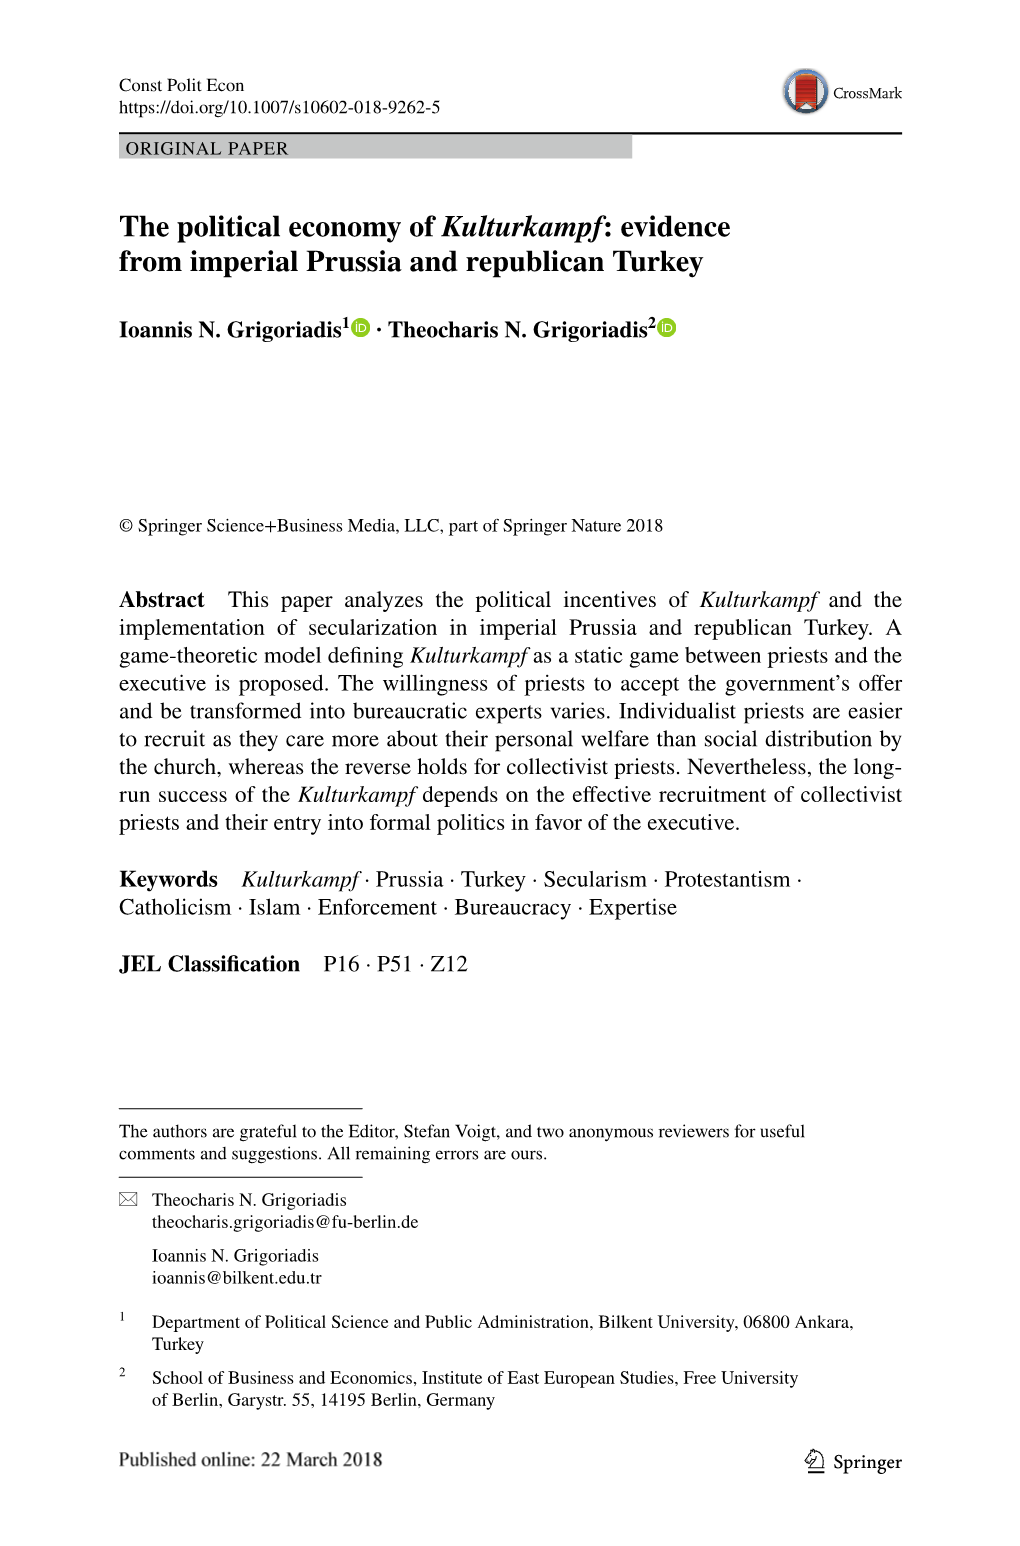 The Political Economy of Kulturkampf: Evidence from Imperial Prussia and Republican Turkey